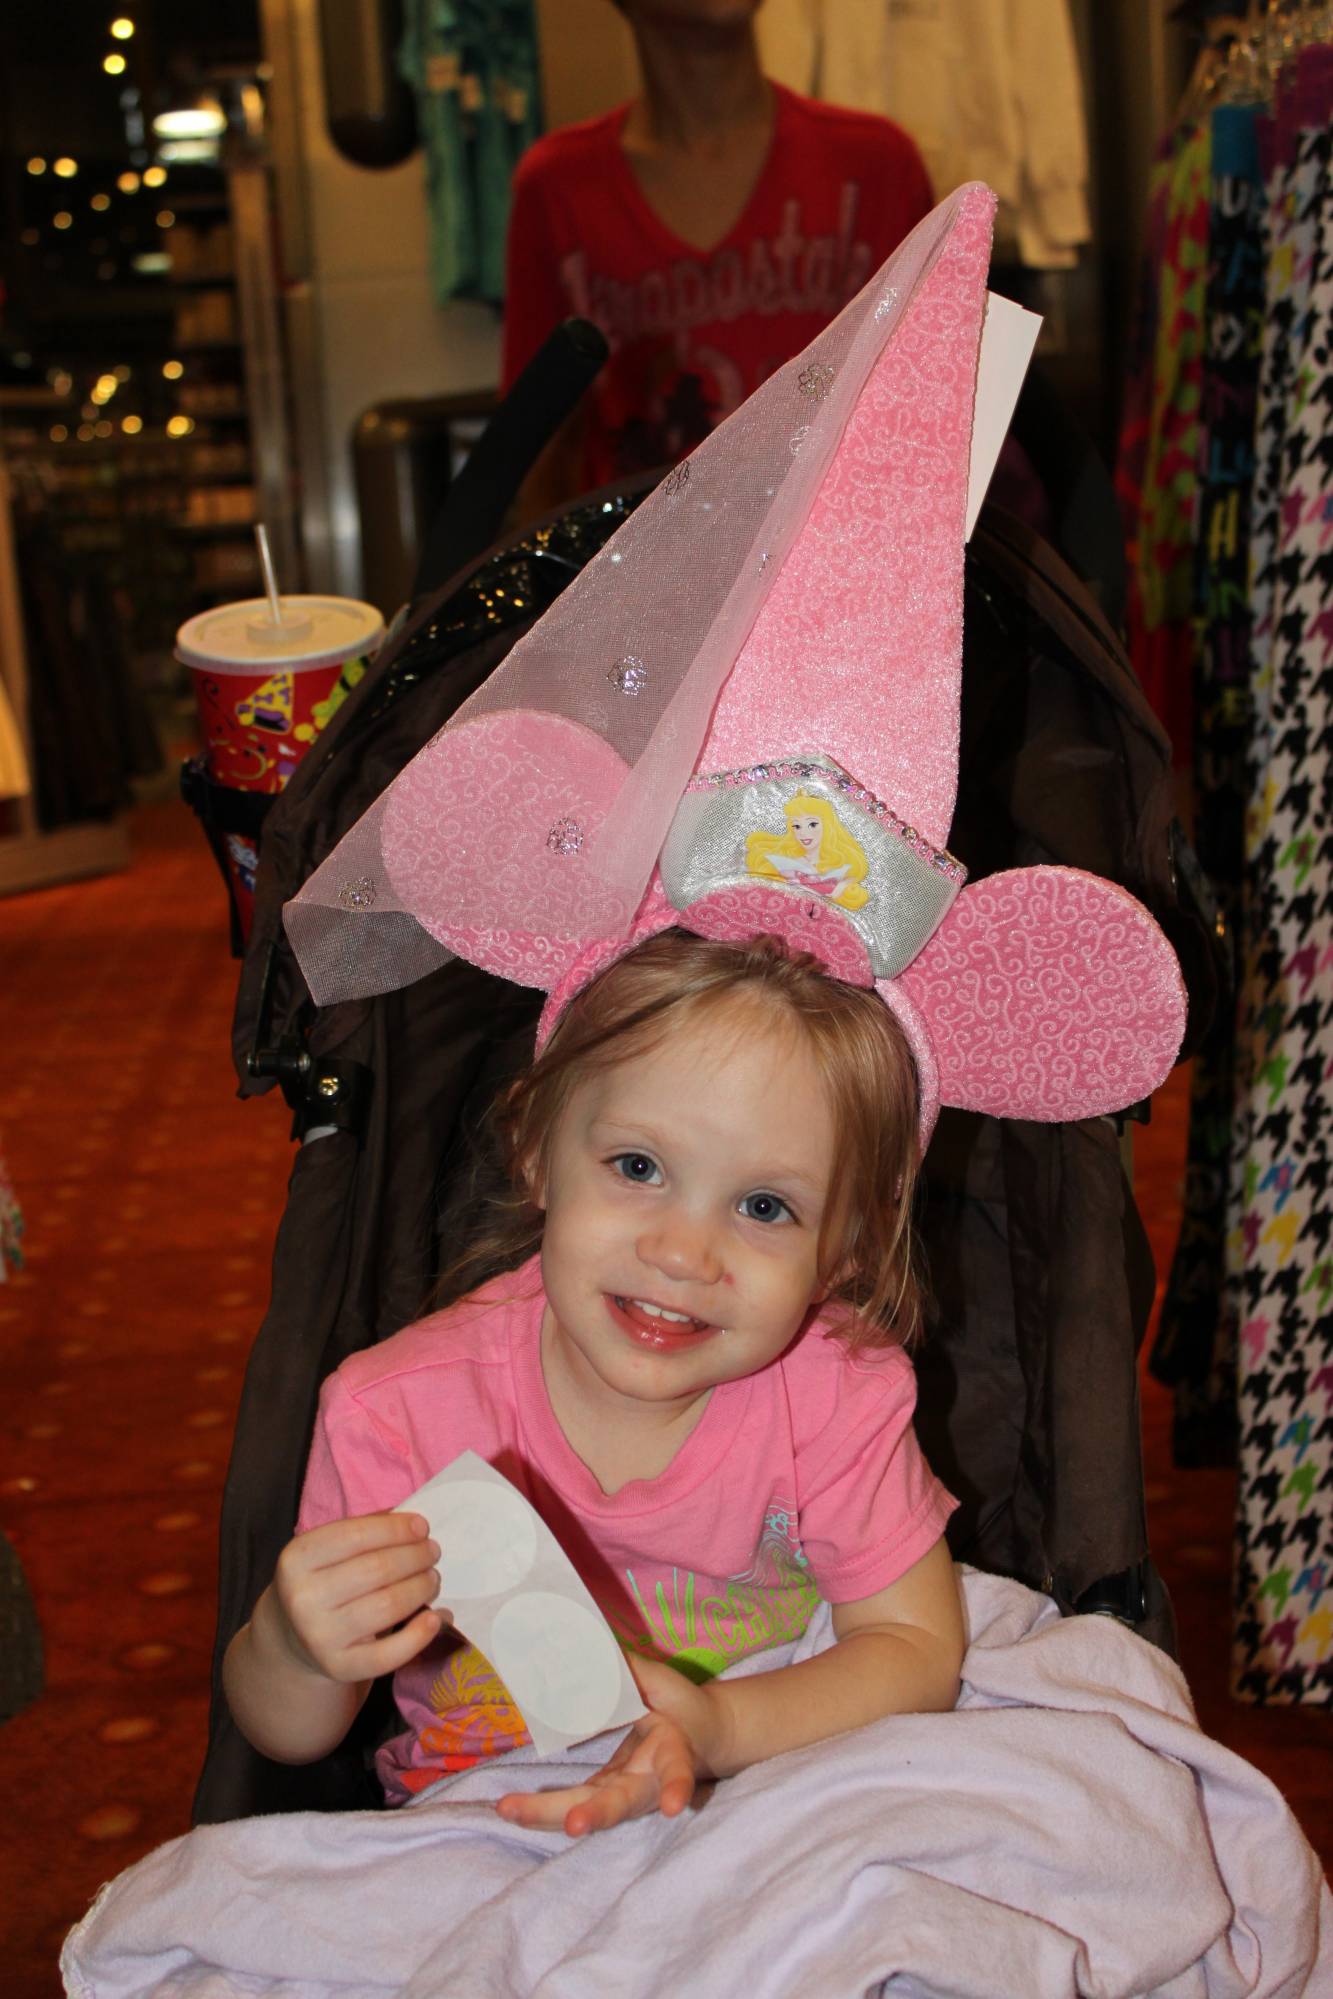 Our Little Princess Shopping in EPCOT